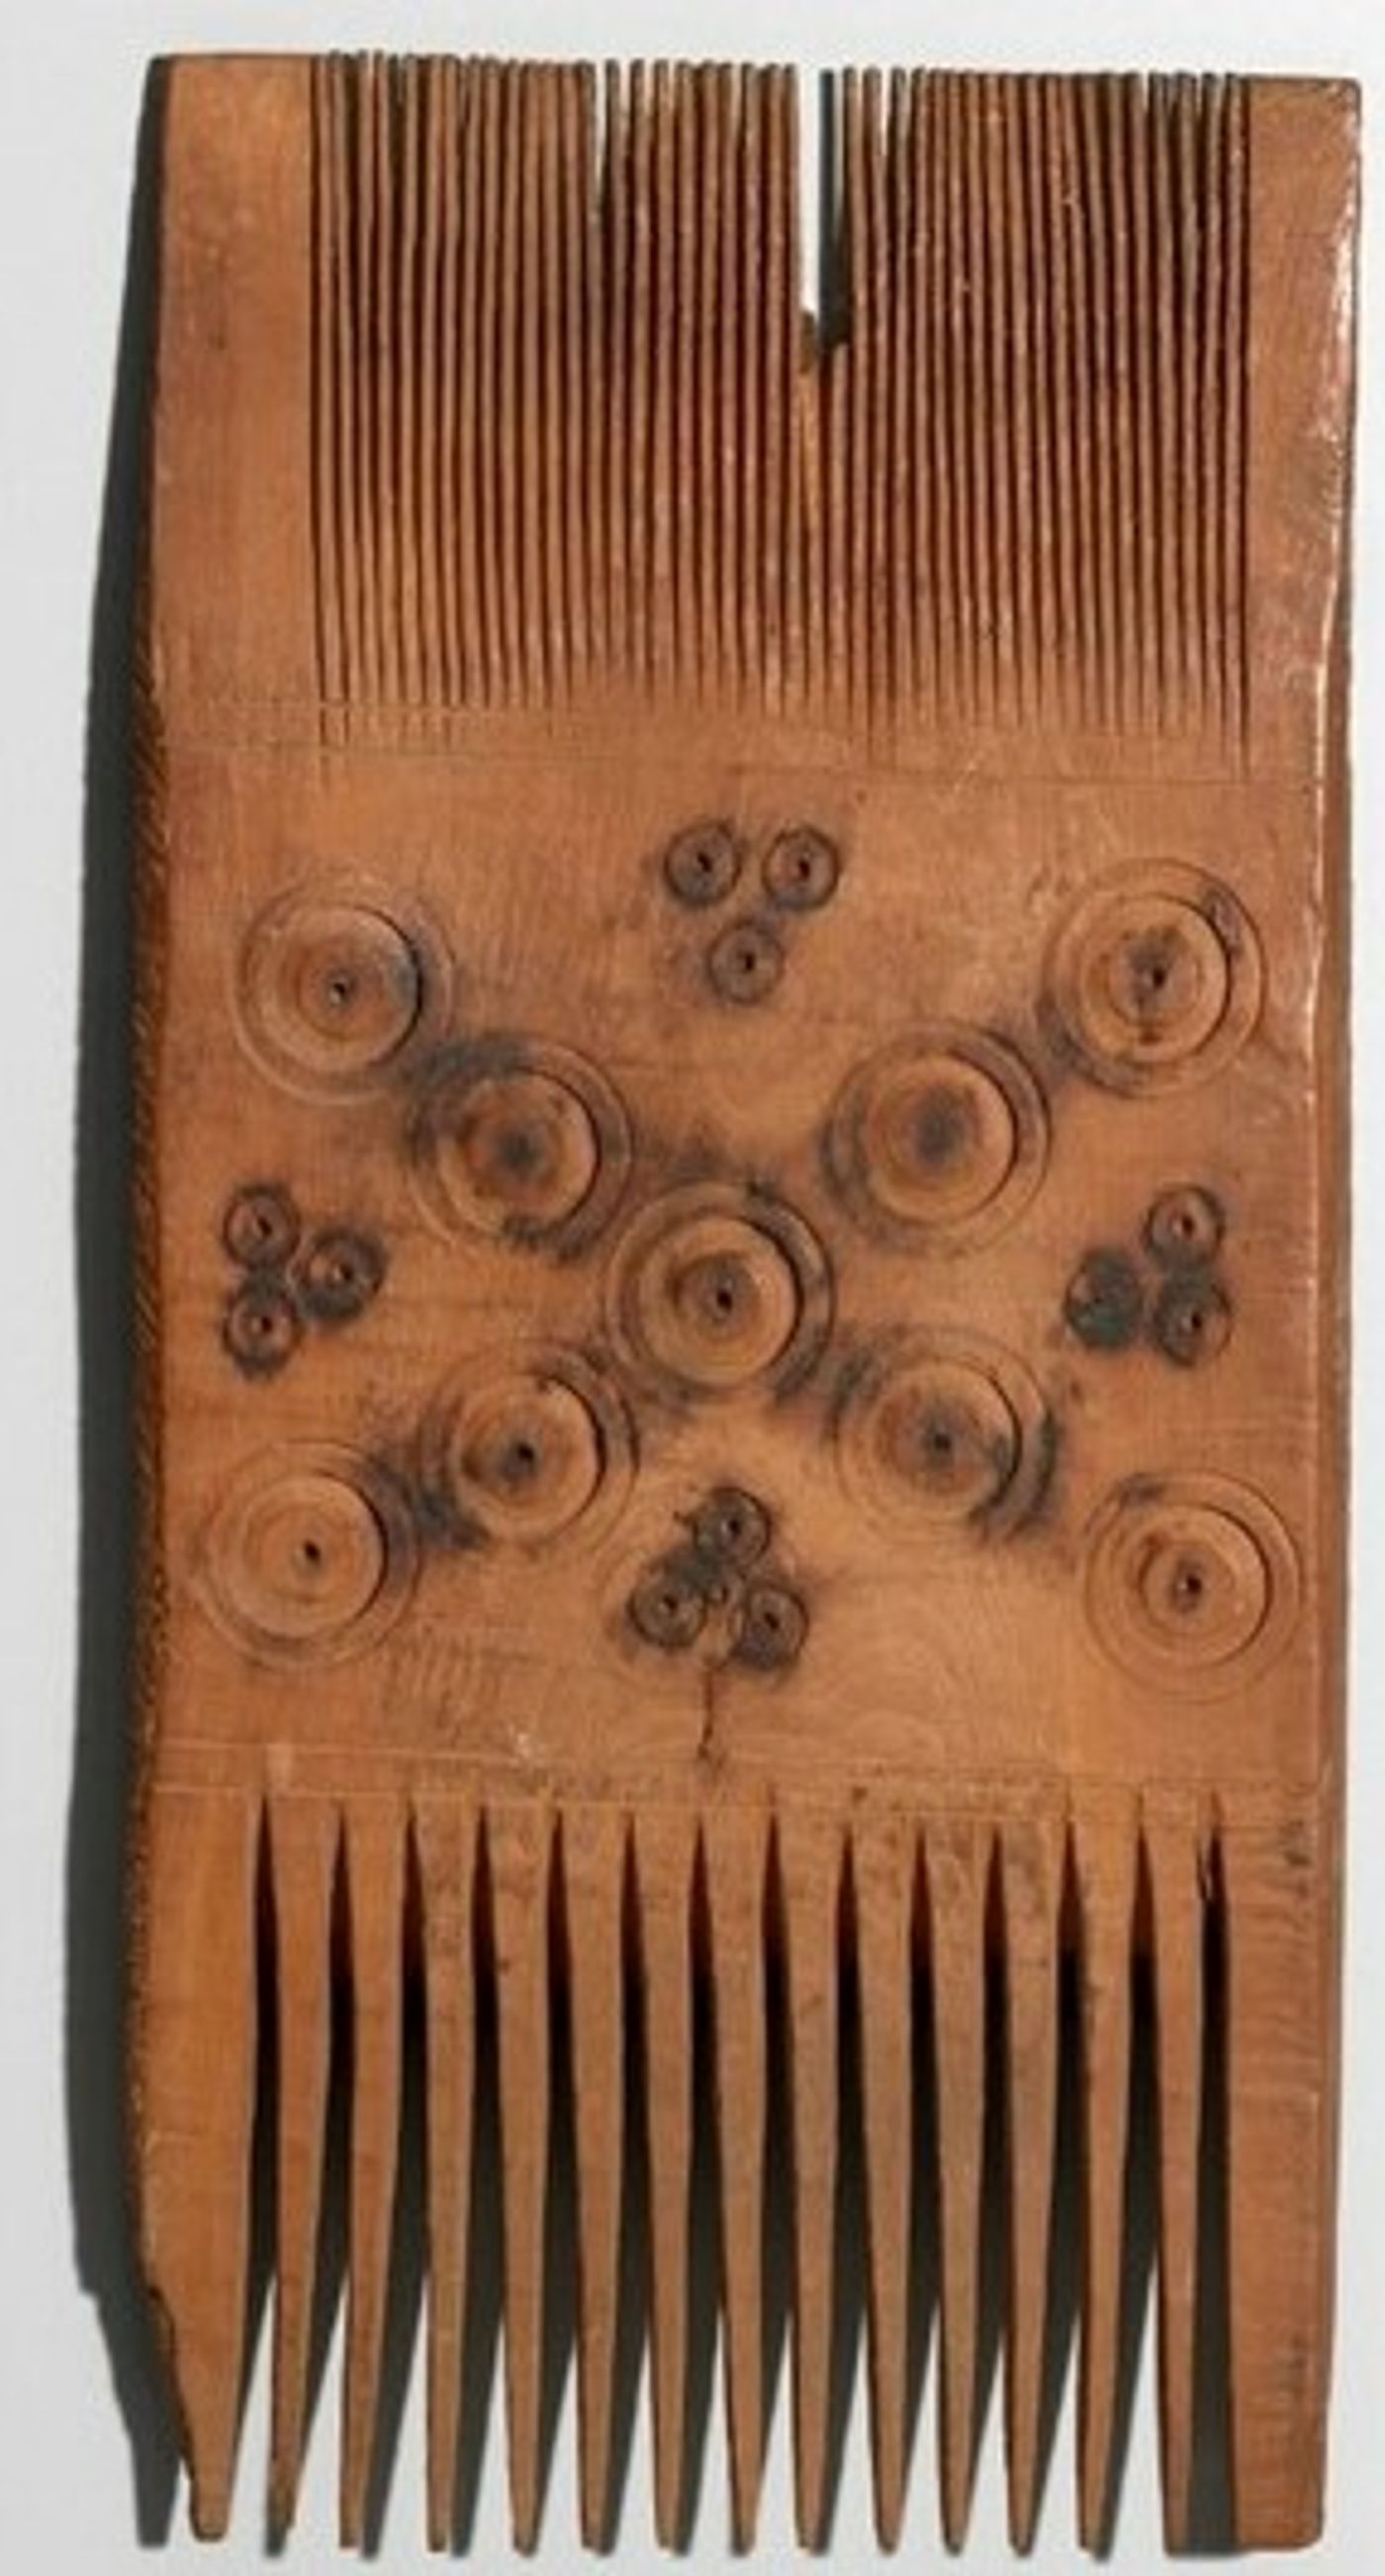 4th c. Egyptian Comb. Digital image courtesy of the Getty's Open Content Program.